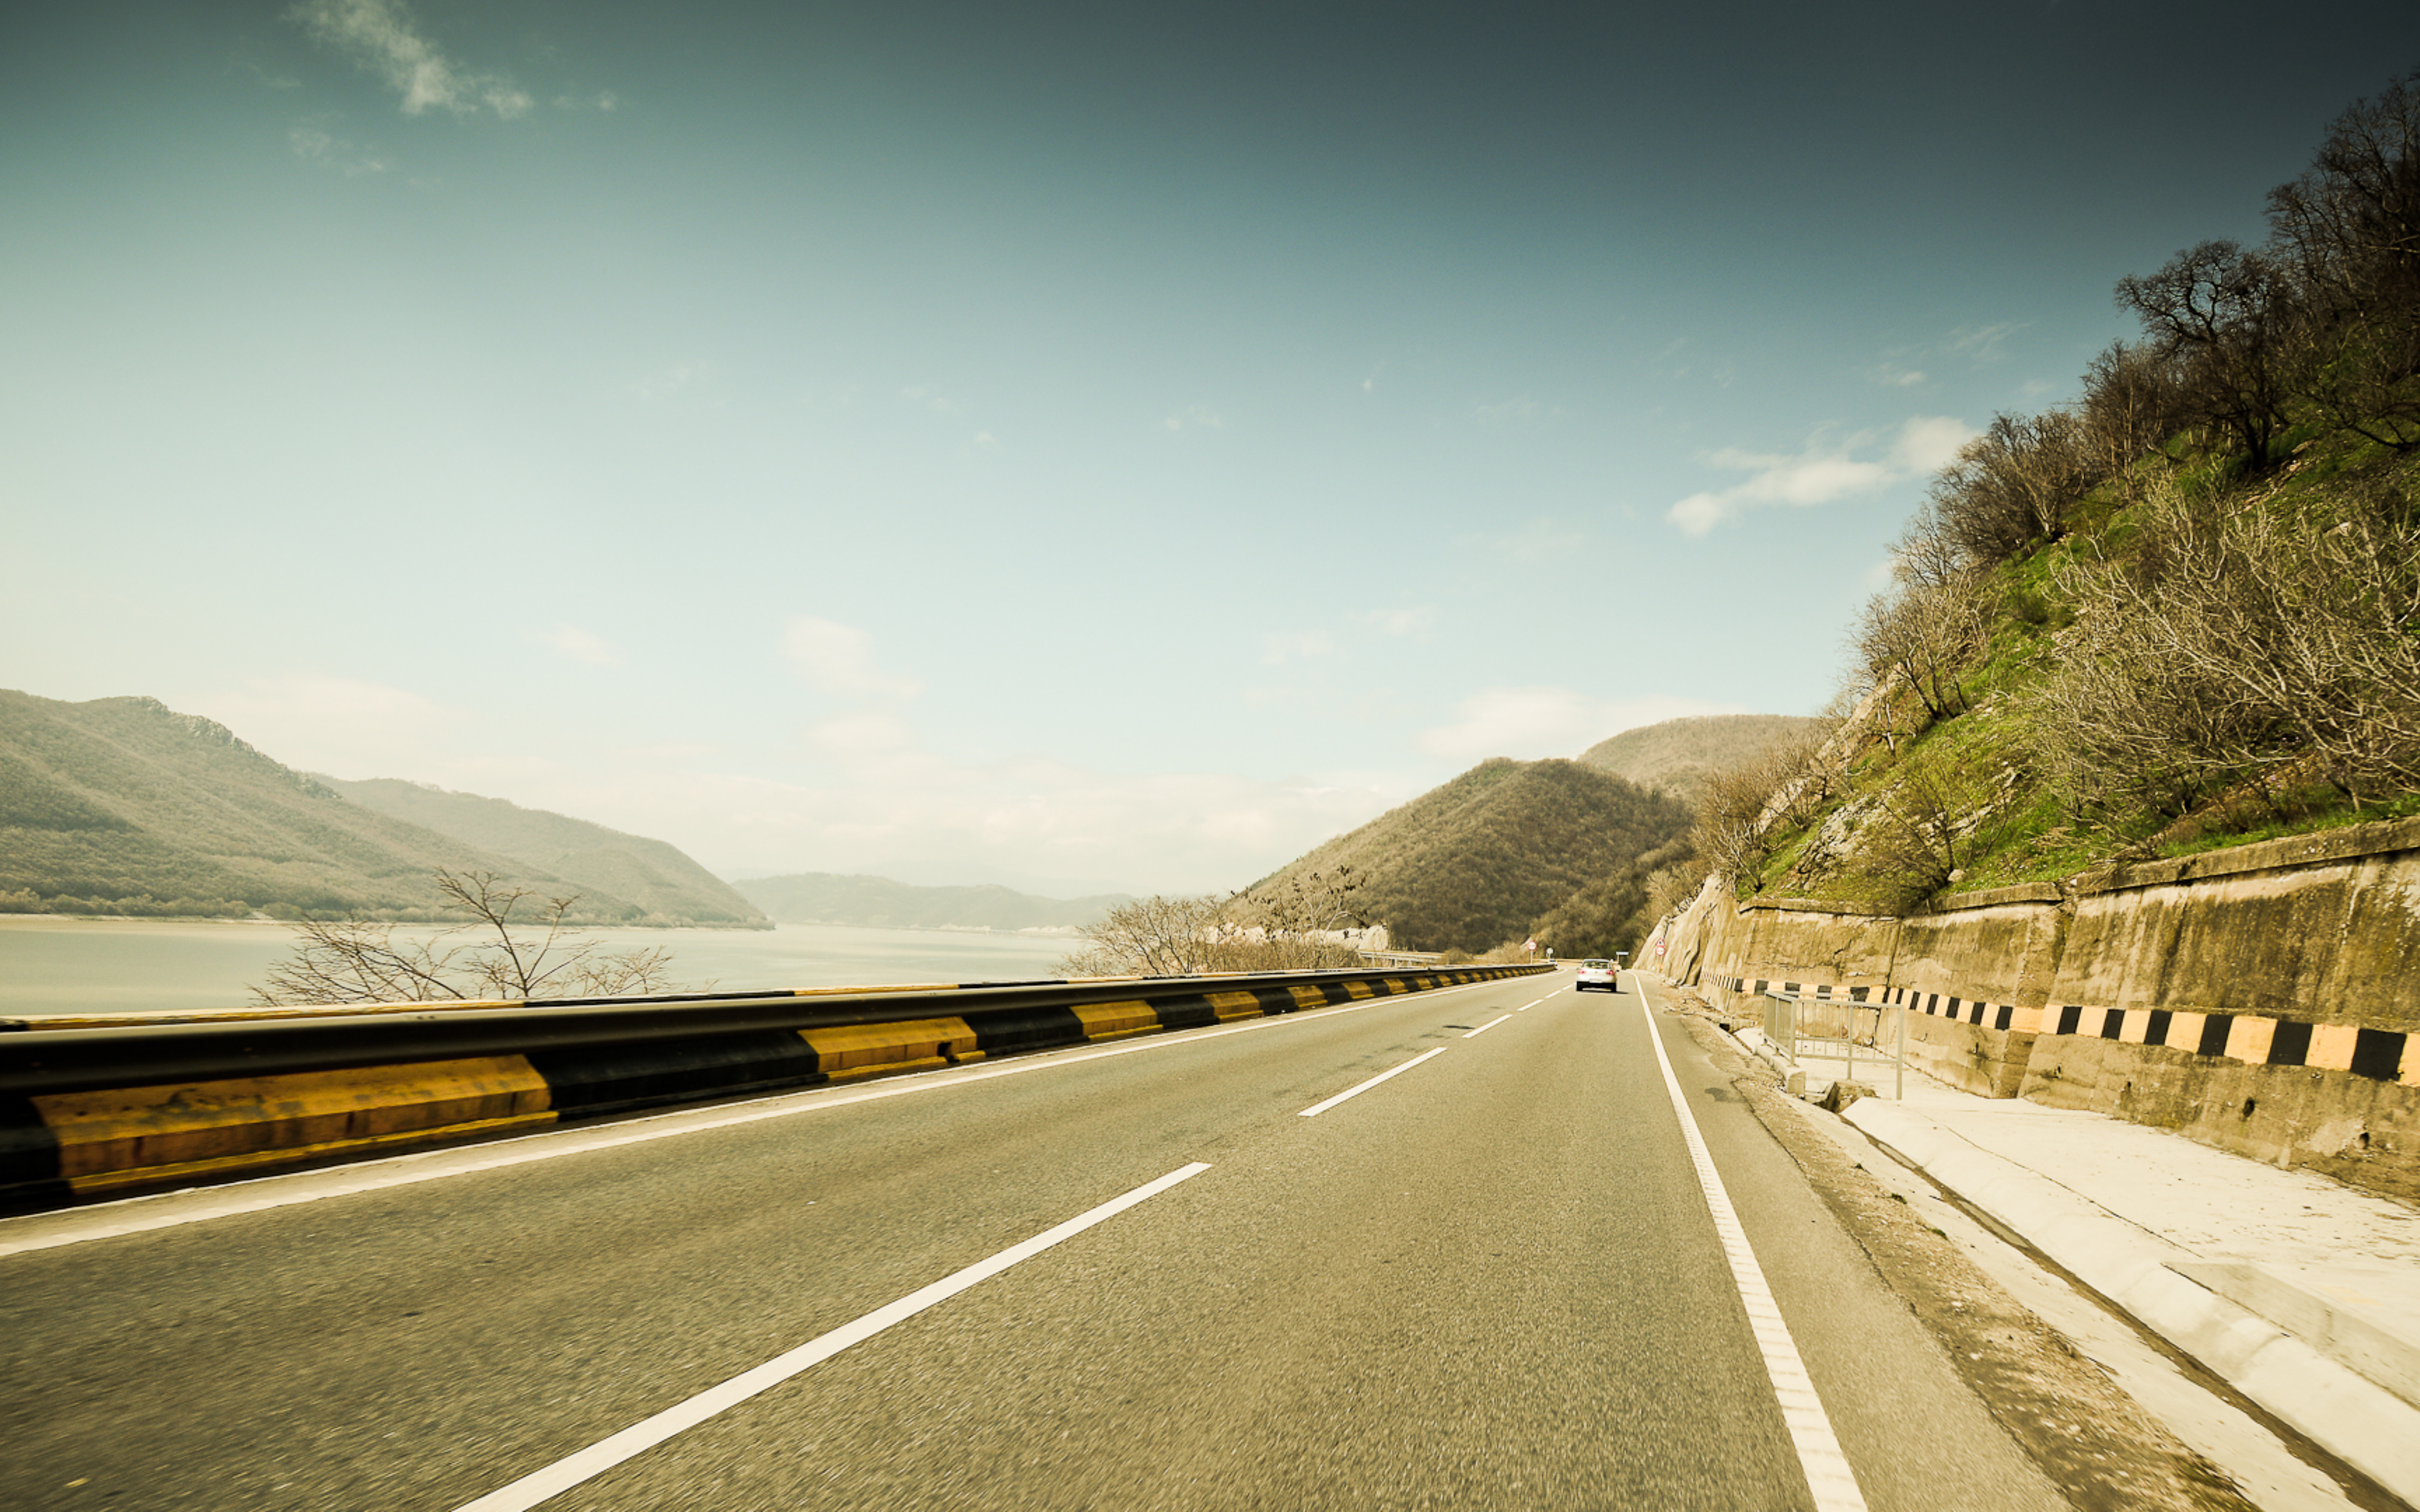 Wallpaper Download 5120x3200 High speed road - the way home